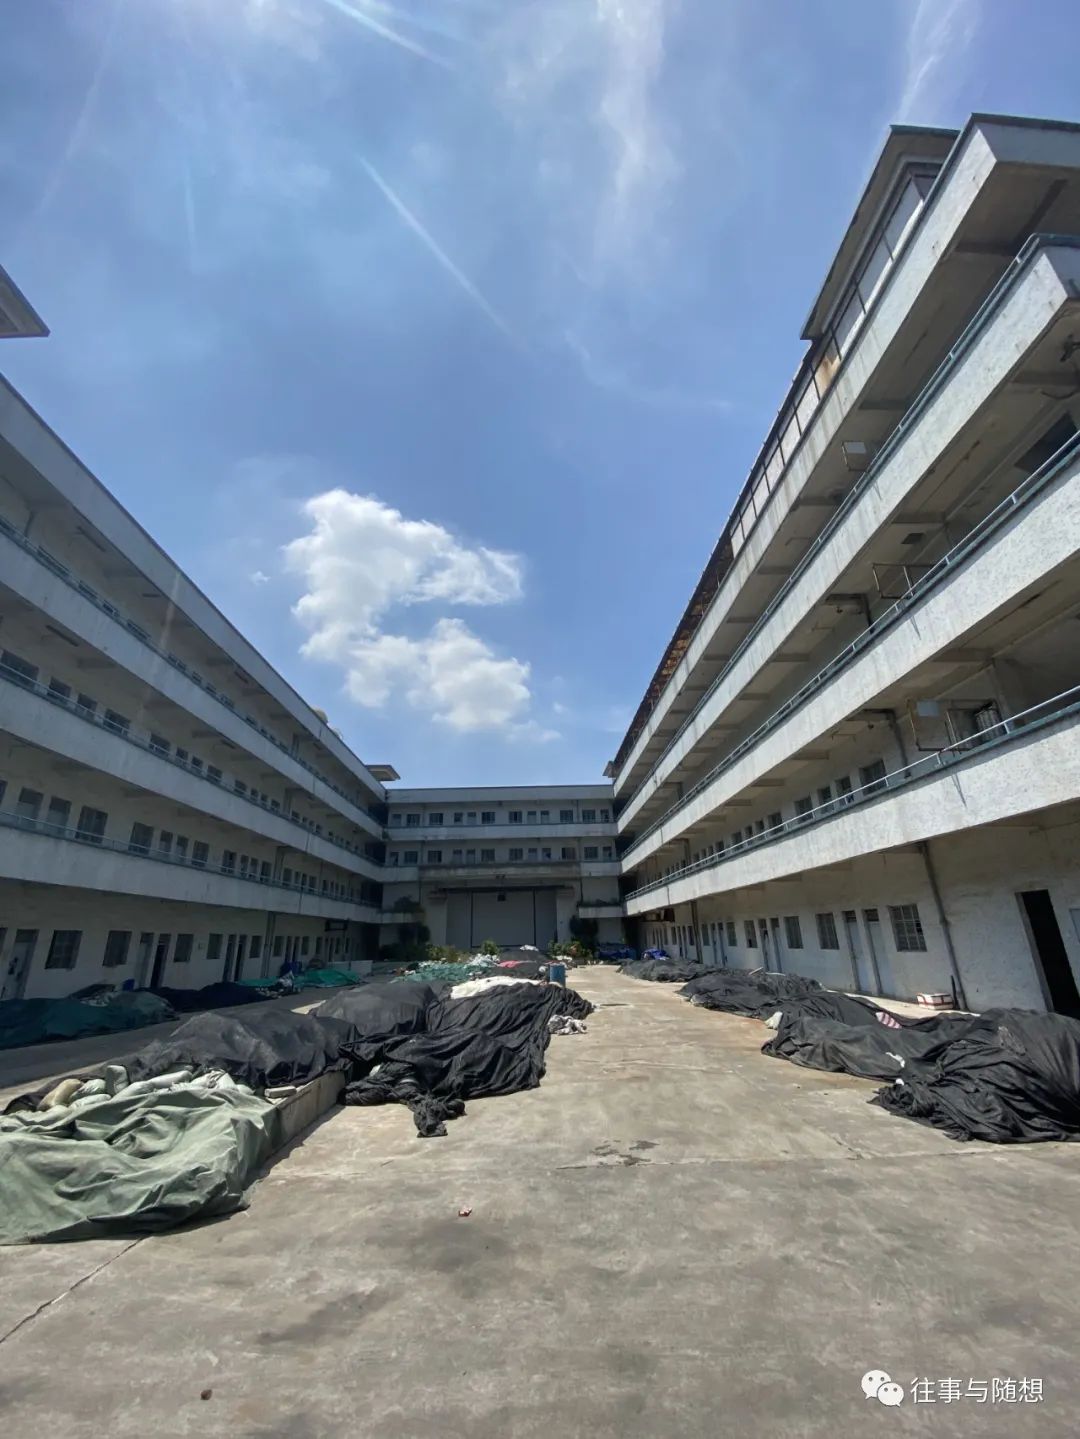 Under a bright blue sky, a rectangular courtyard surrounded by four-story concrete building. The courtyard is heaped with debris covered with green and black tarps.